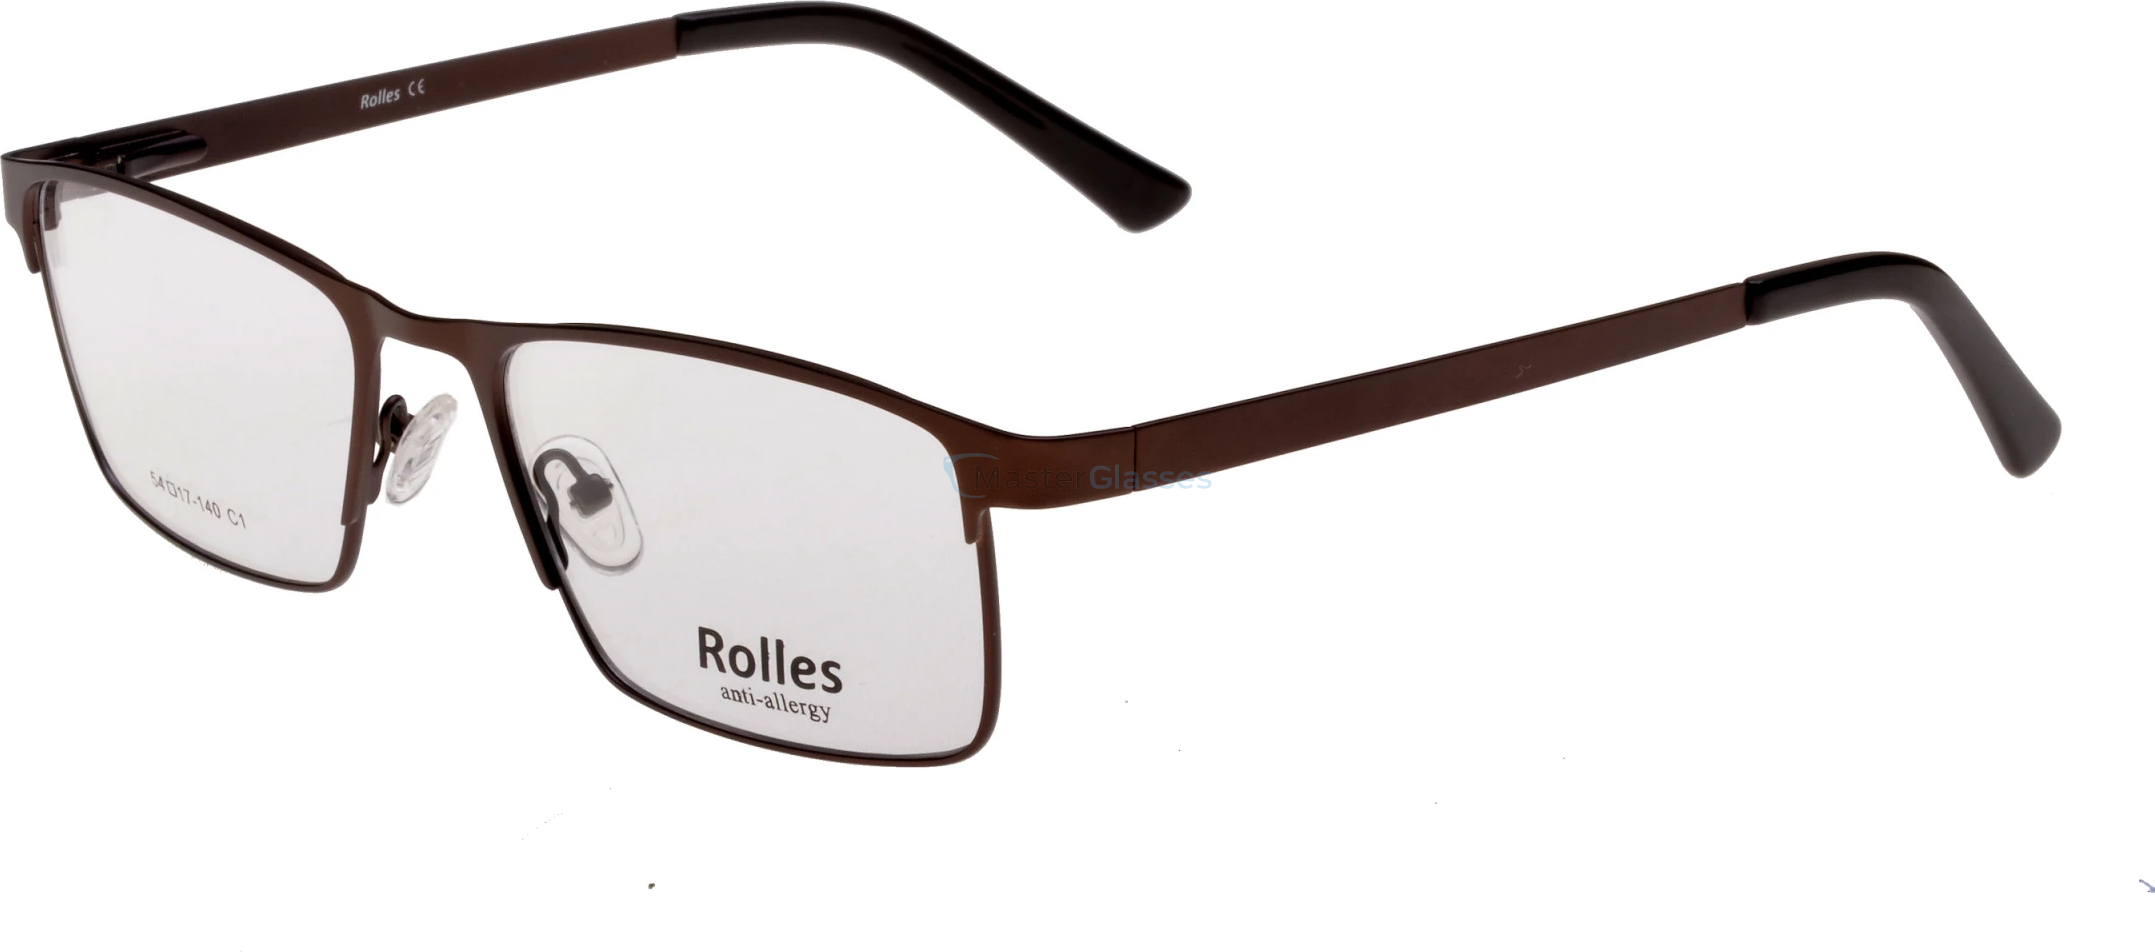  Rolles 358 01